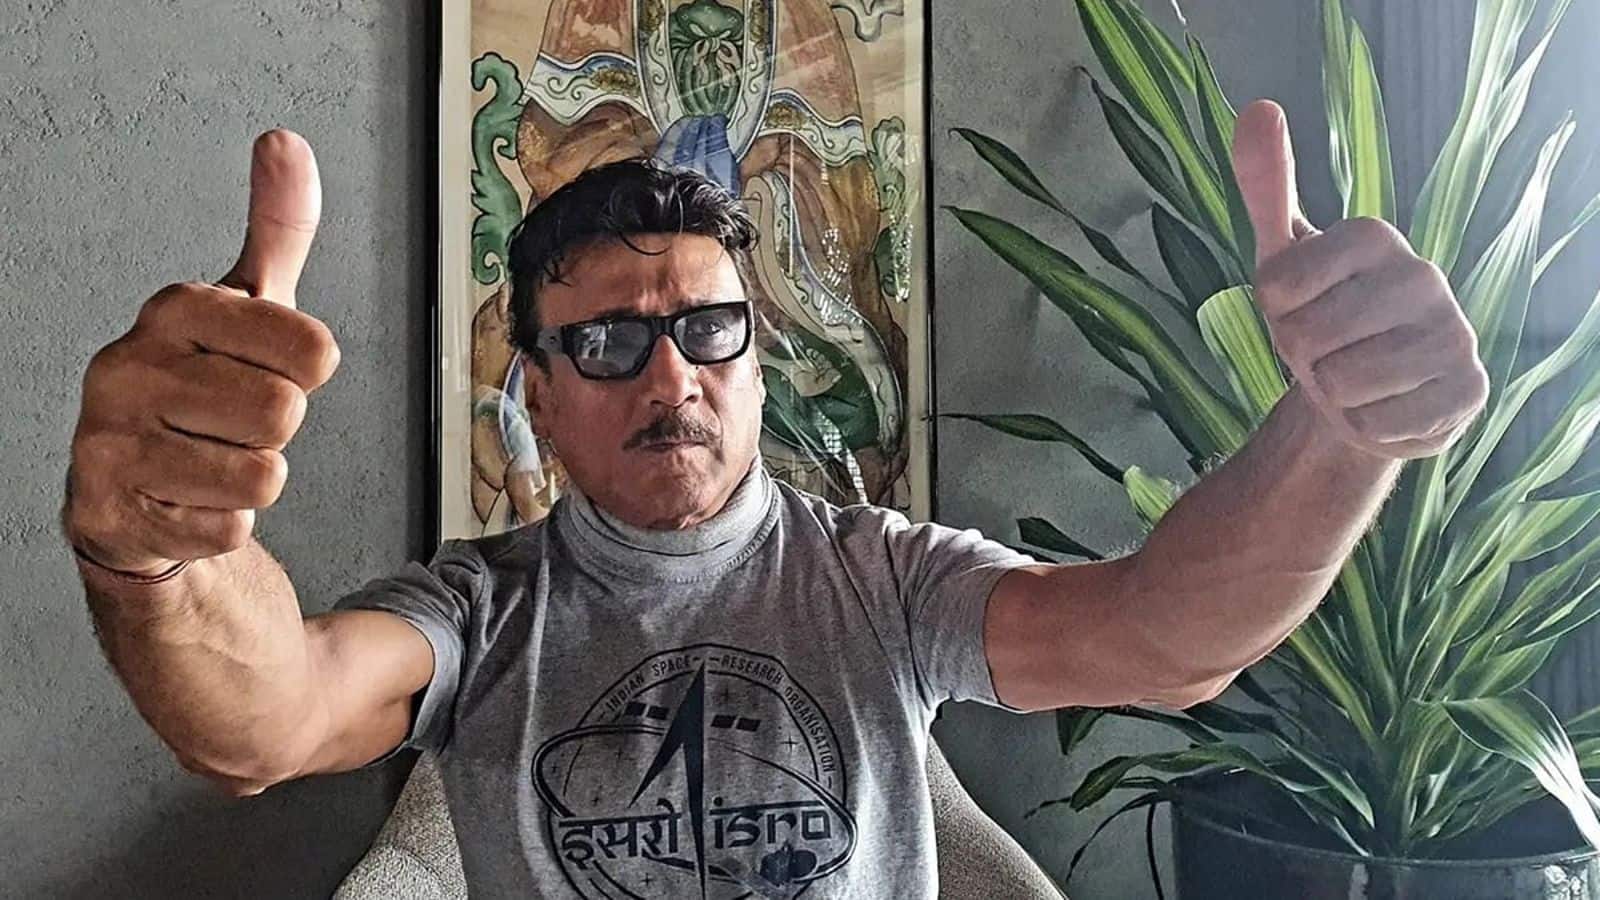 Delhi HC defends unauthorized use of Jackie Shroff's personality: Report